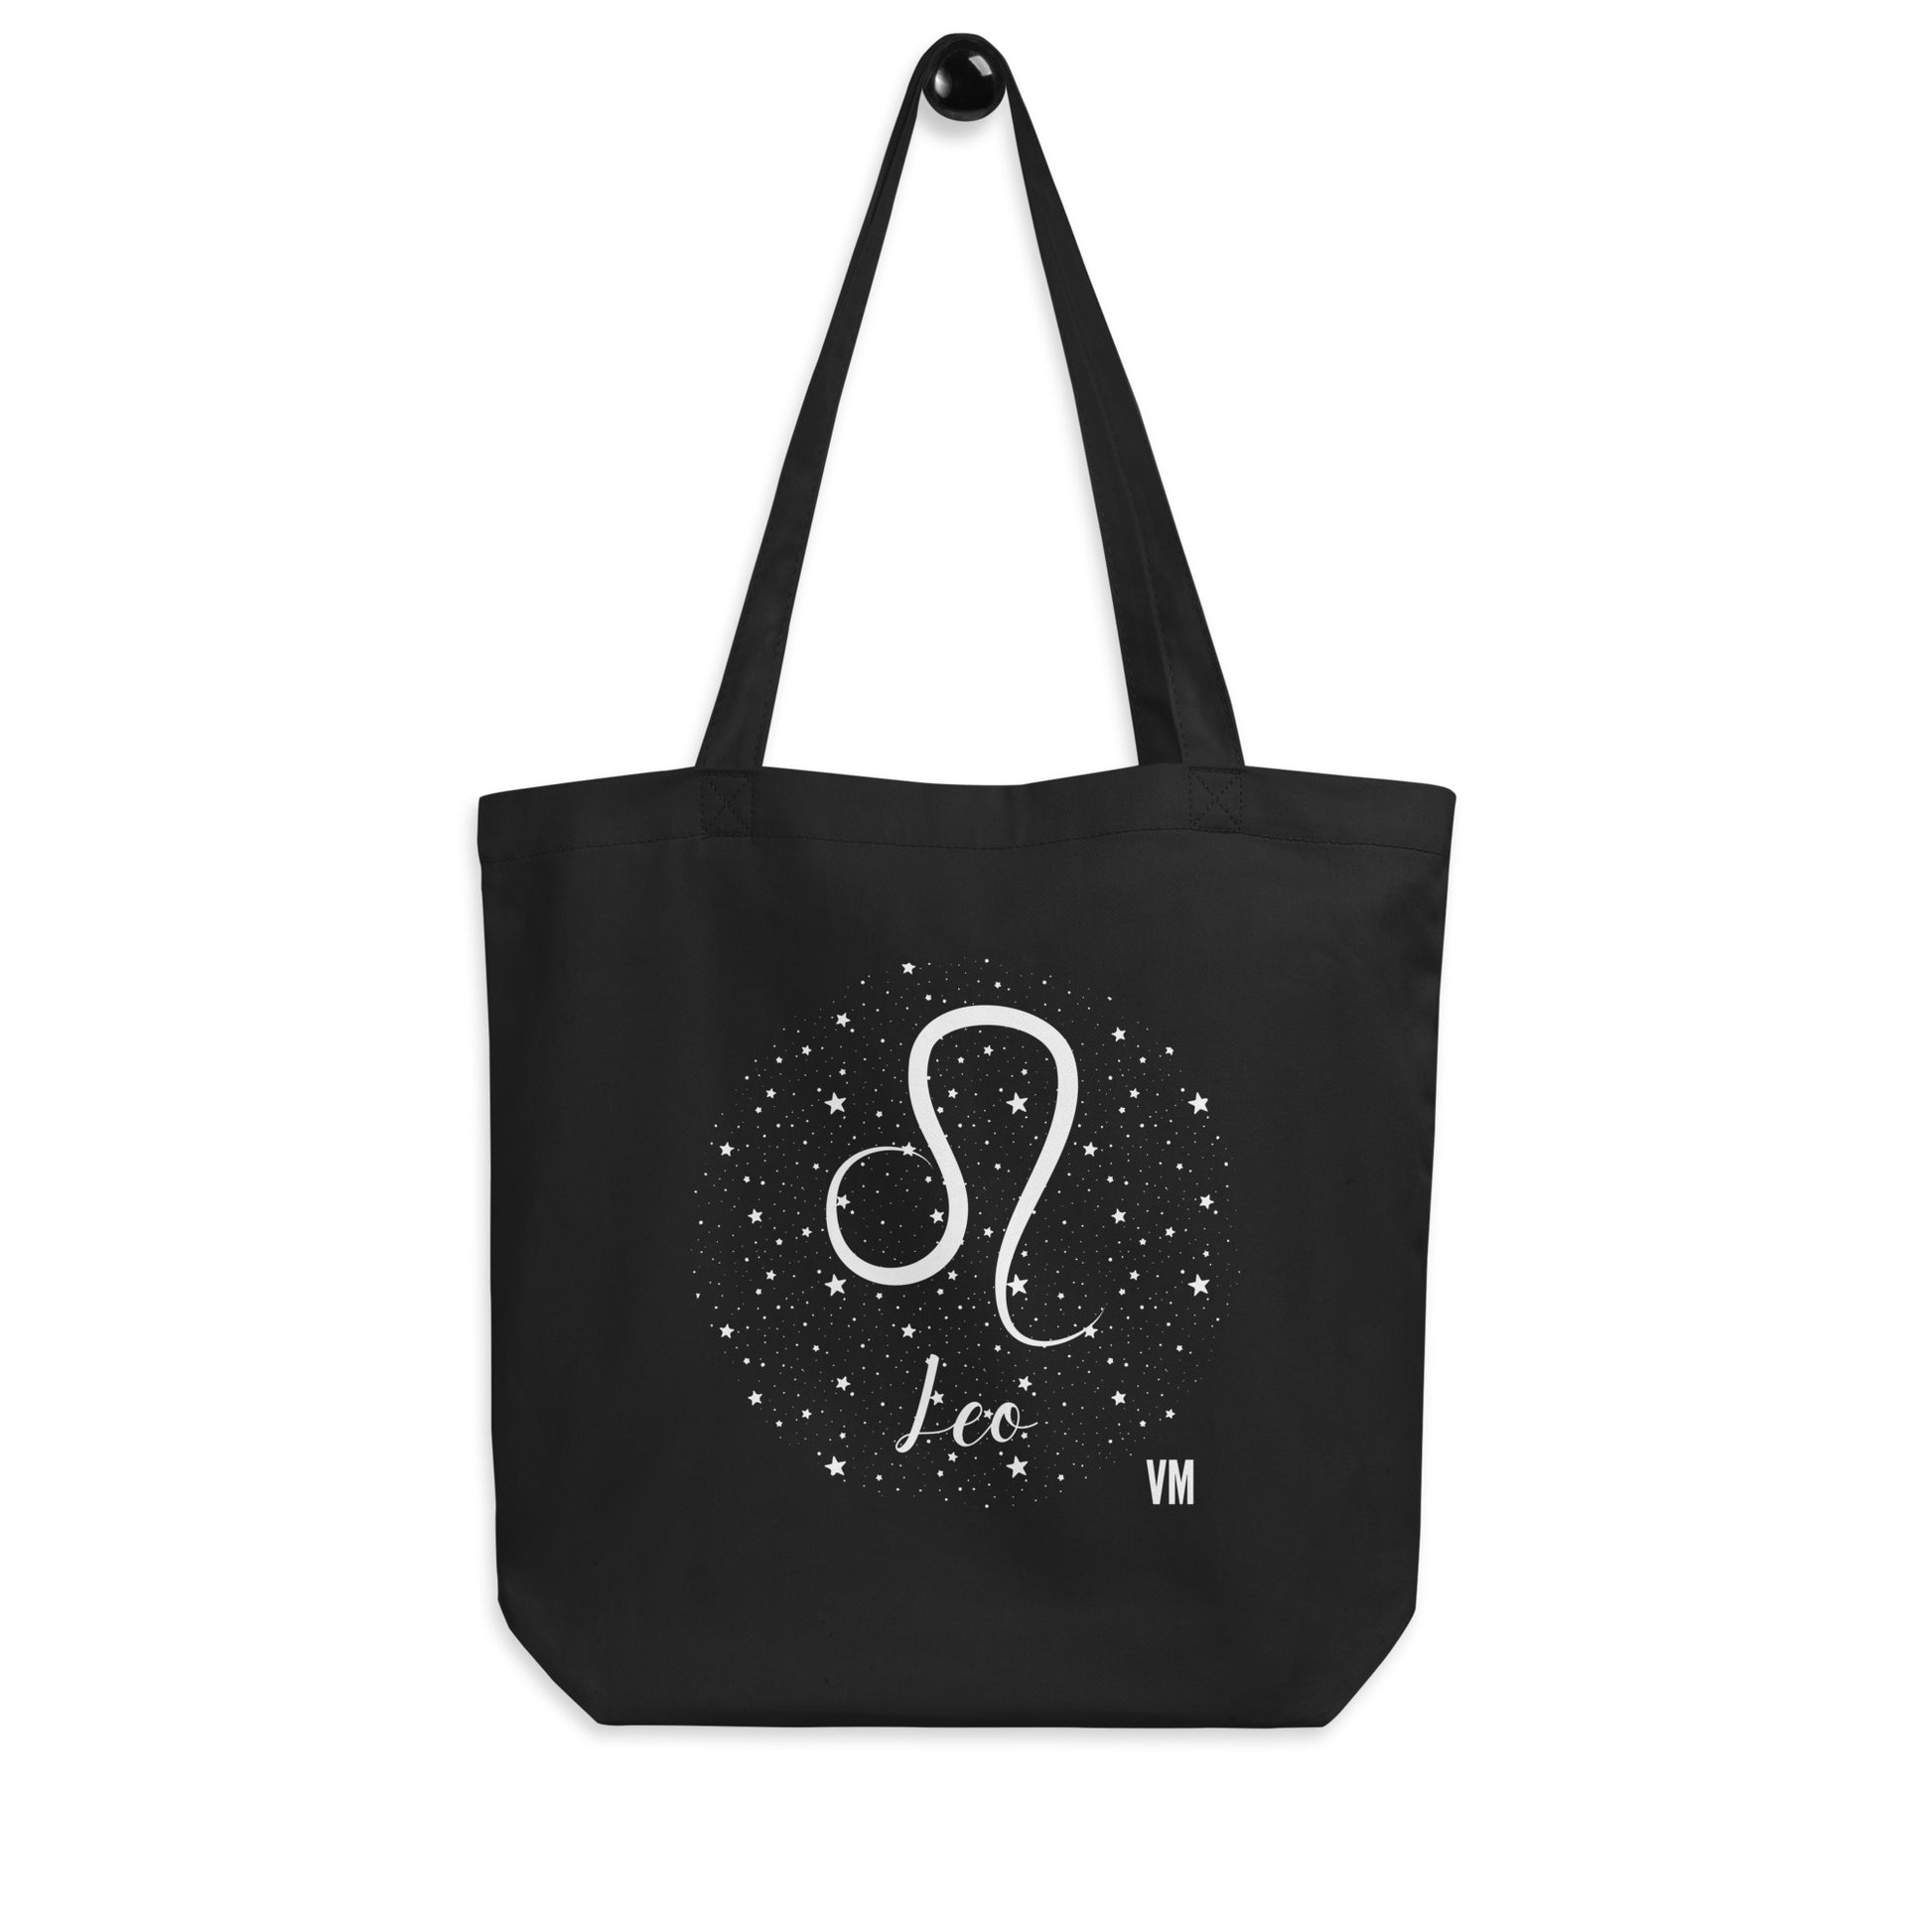 totally virgo! - y2k 2000s aesthetic zodiac star sign vibes Tote Bag for  Sale by sweetnsourbunny